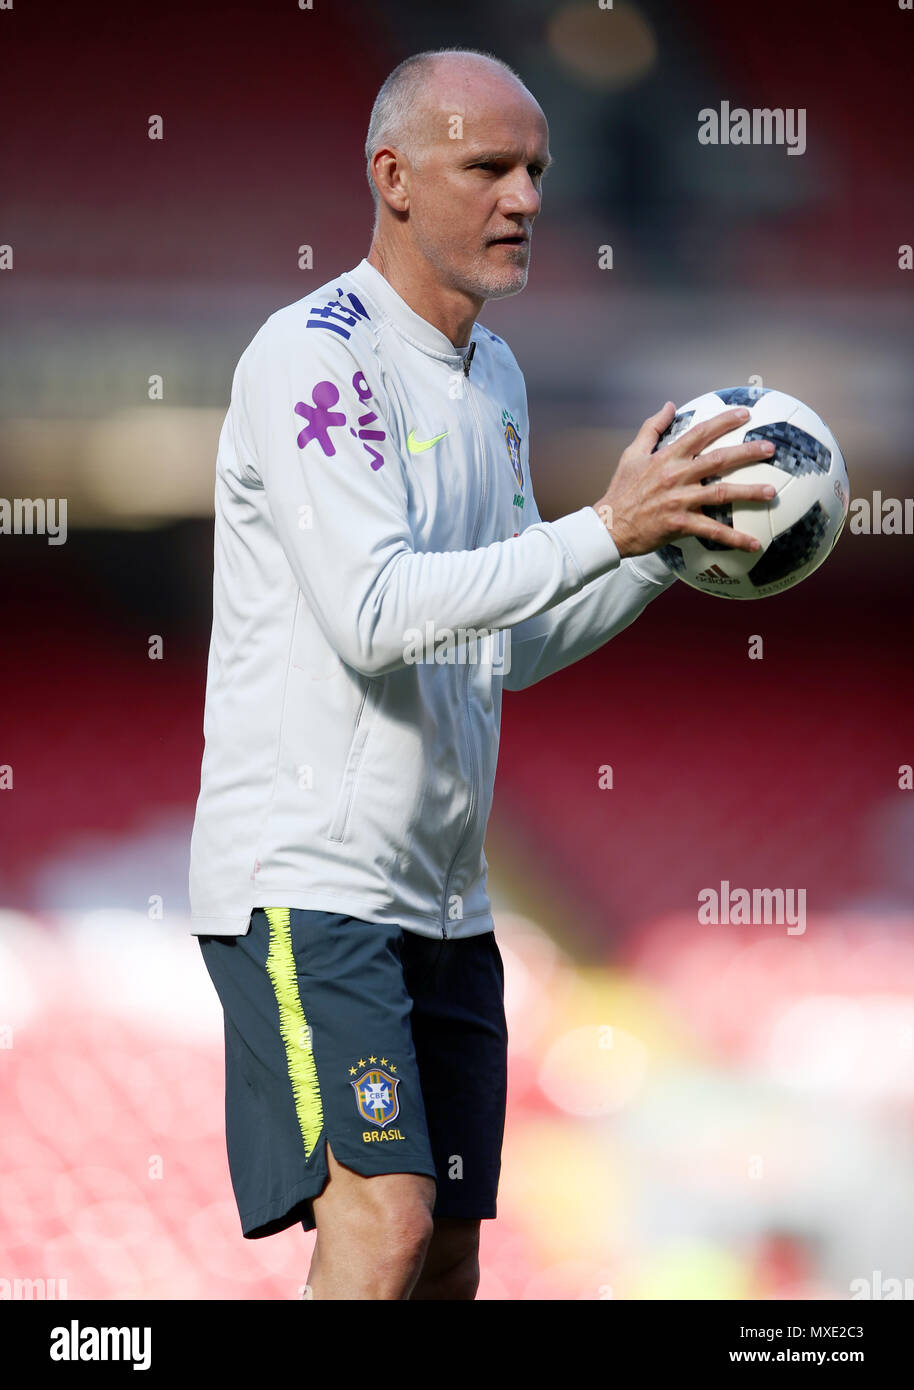 Brazil goalkeeping coach Claudio Taffarel during the International Friendly match at Anfield, Liverpool. PRESS ASSOCIATION Photo. Picture date: Sunday June 3, 2018. See PA story SOCCER Brazil. Photo credit should read: Nick Potts/PA Wire. . Stock Photo